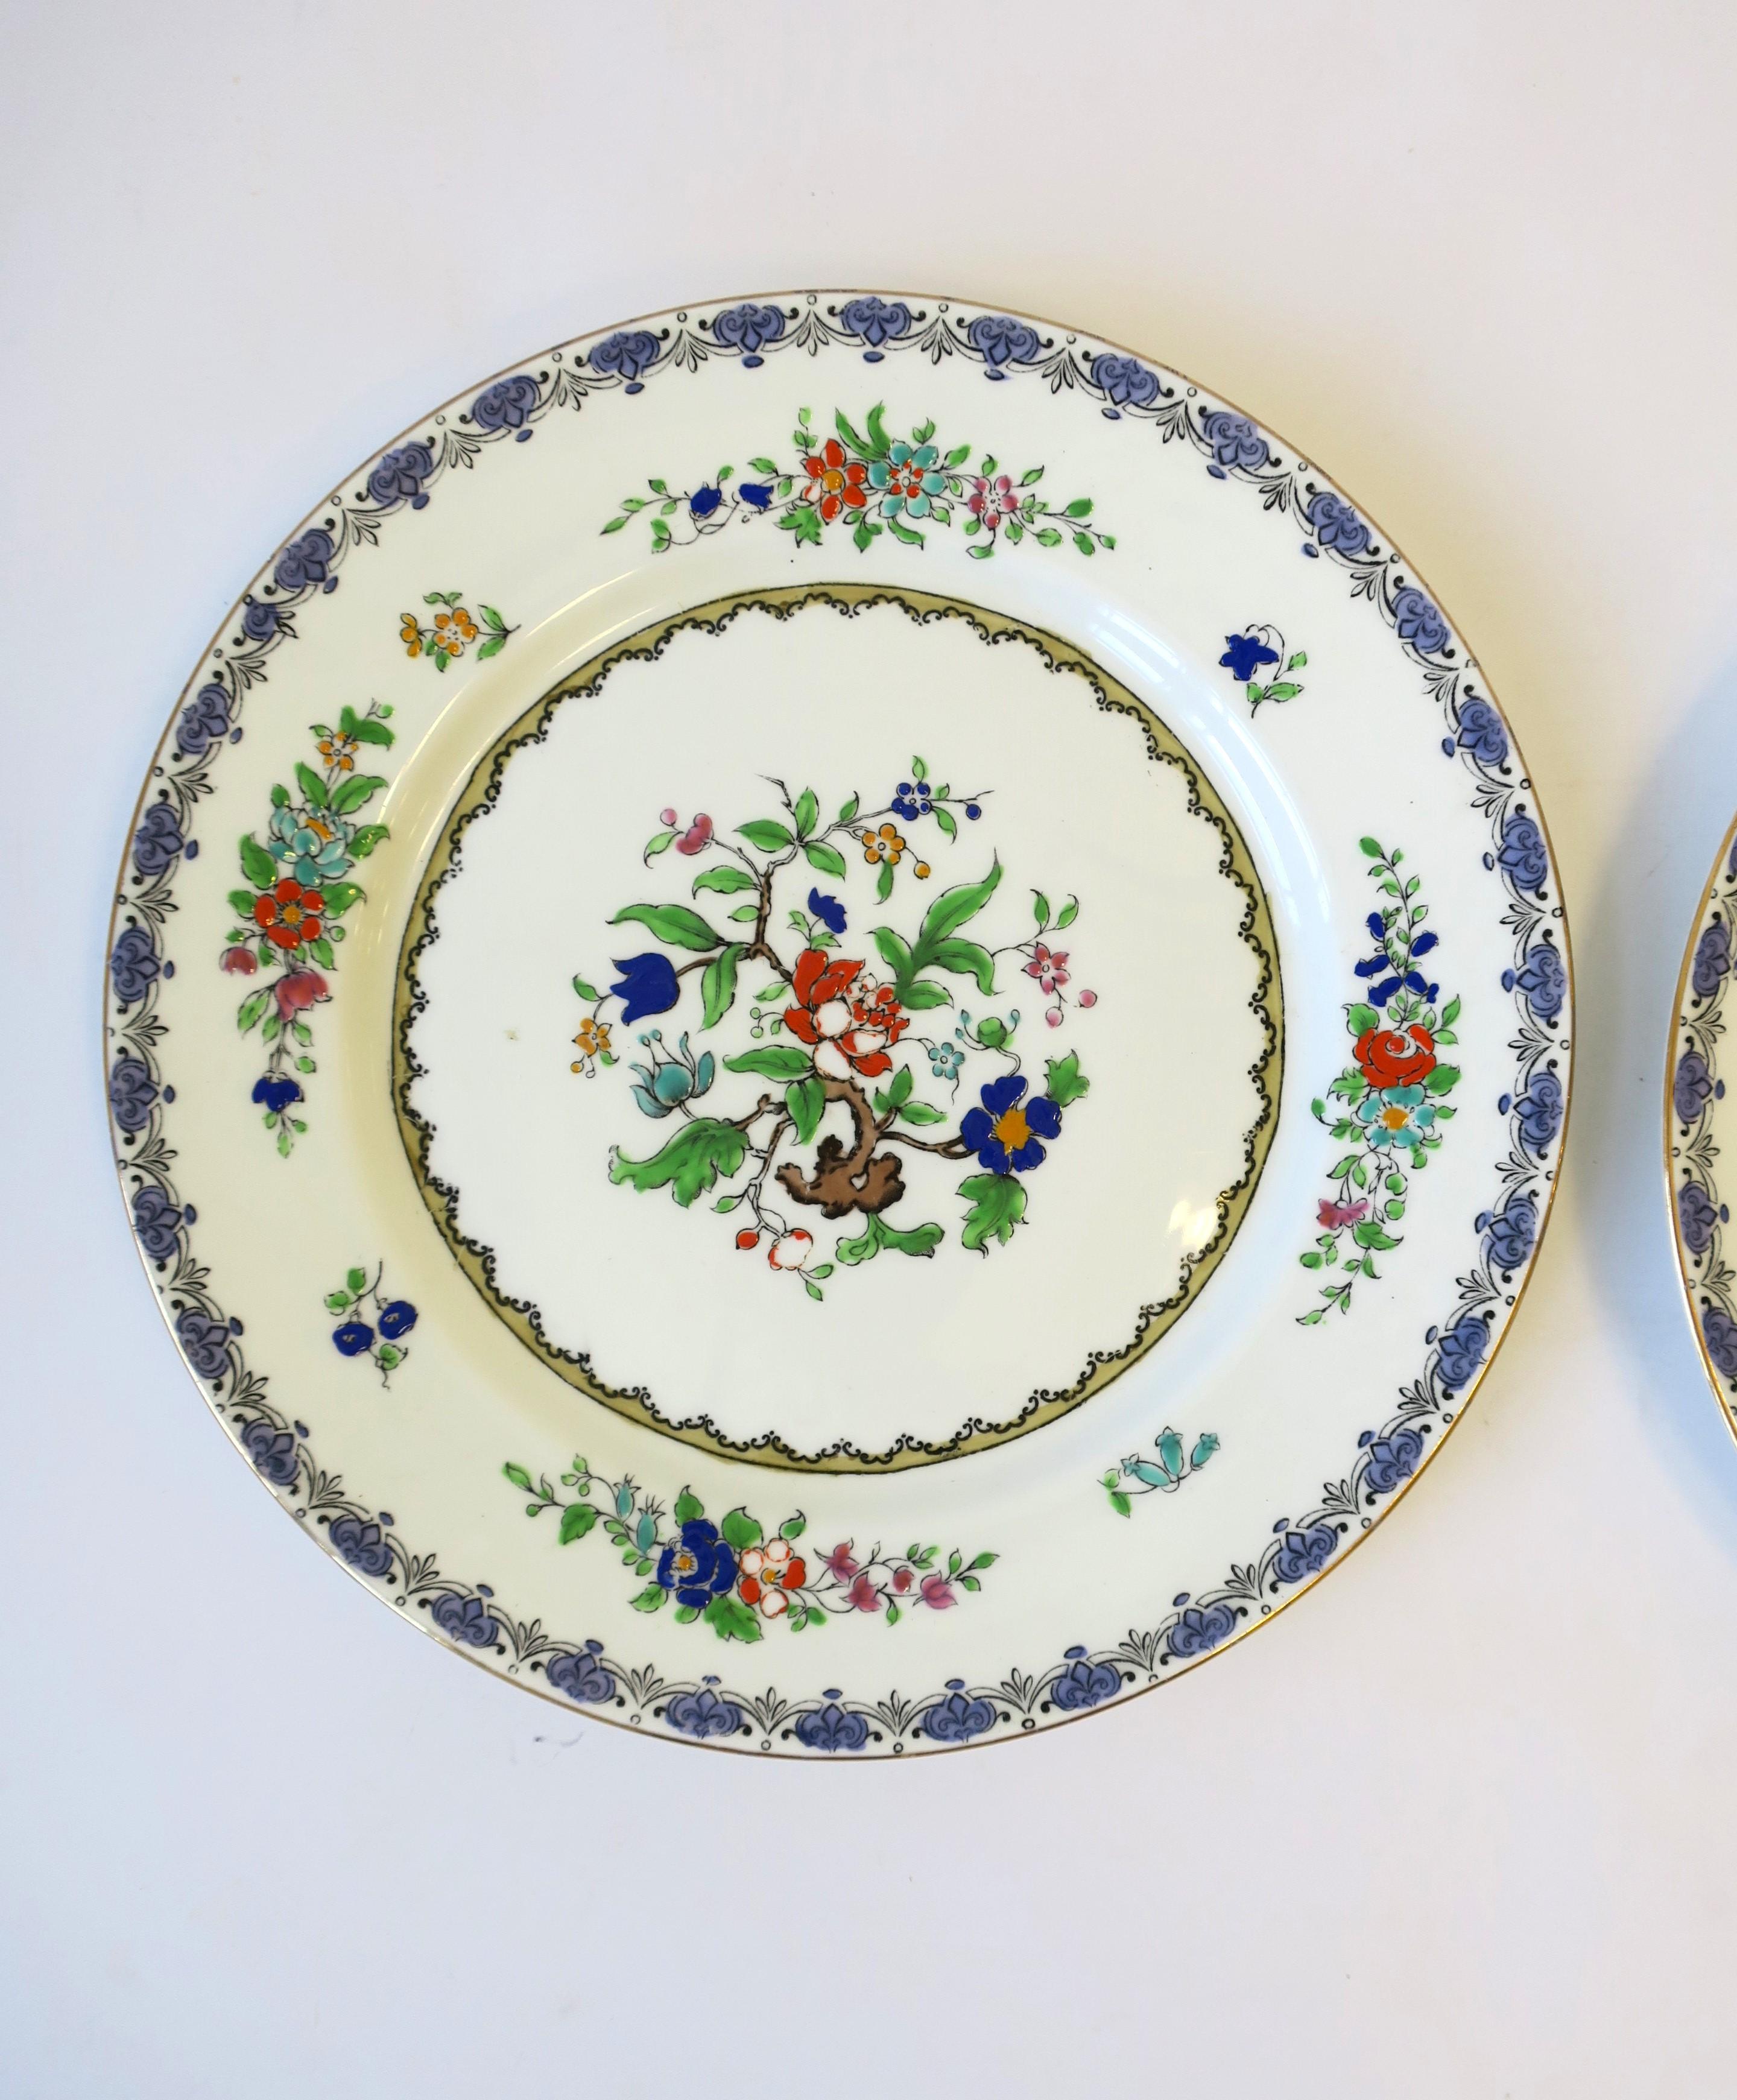 20th Century English Adderley Ware Porcelain Plates, Pair For Sale